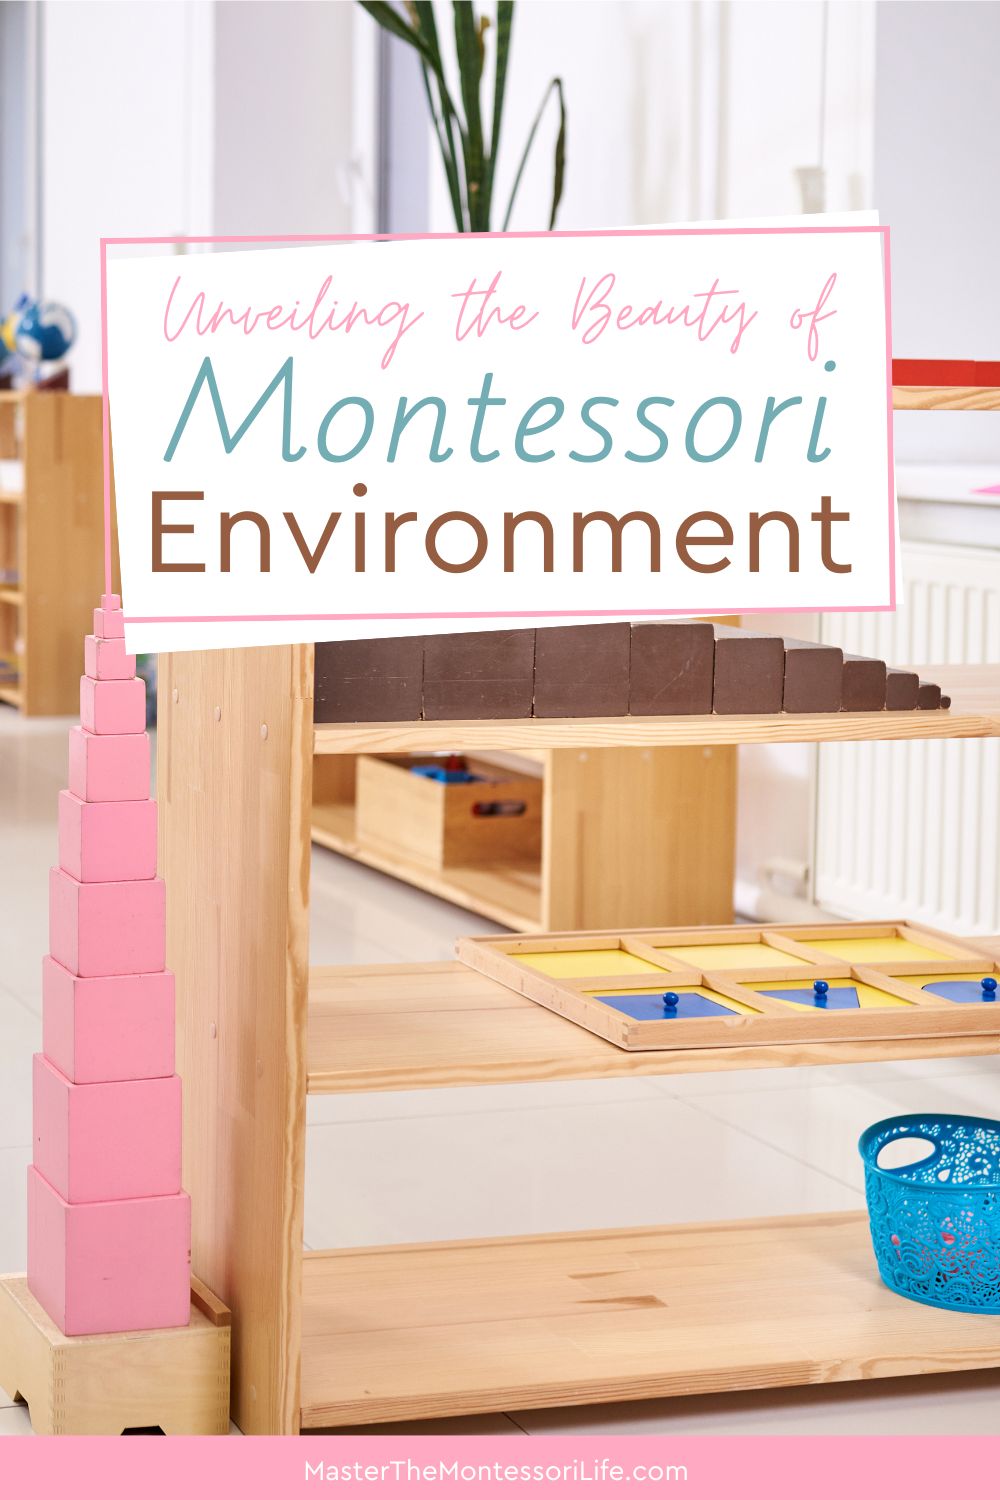 Unveiling the Beauty of Montessori in the Environment